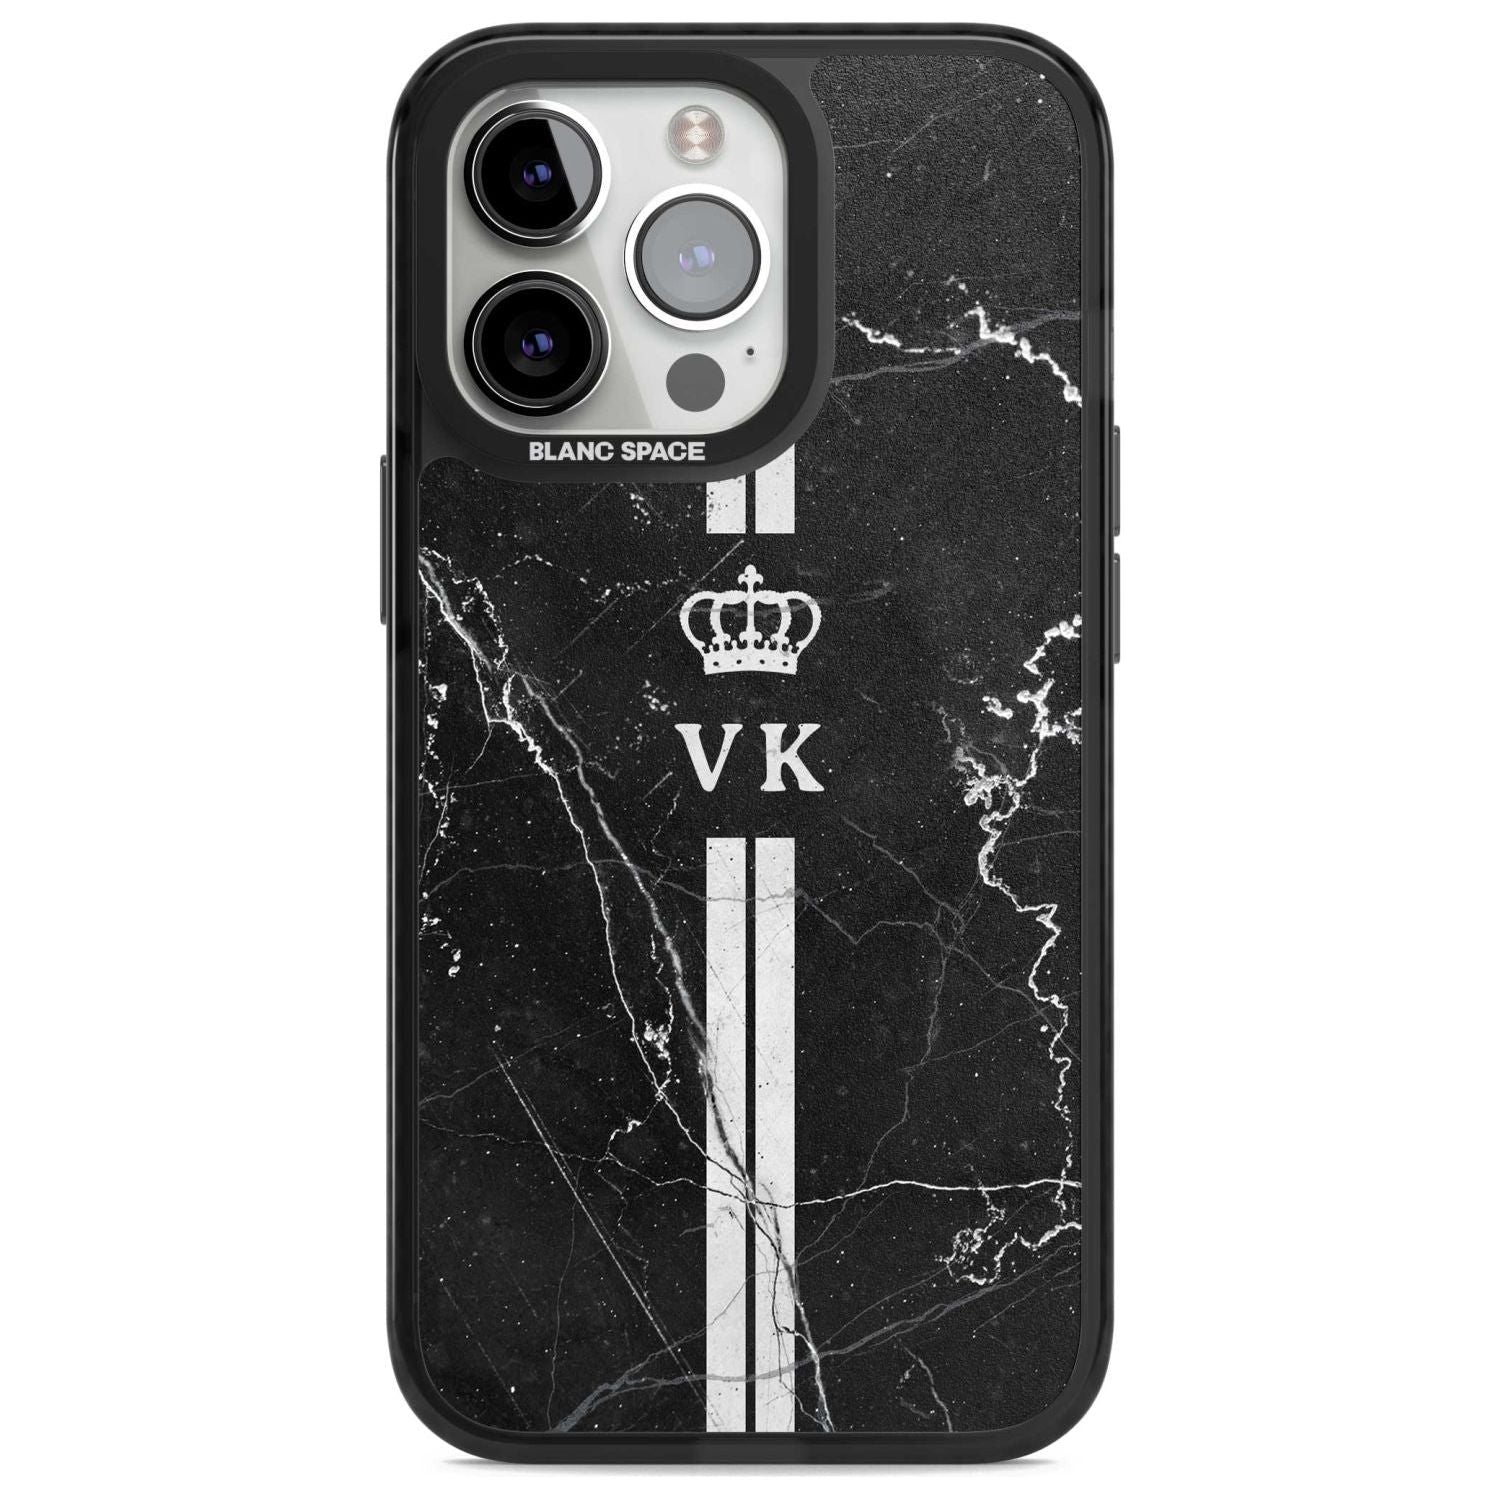 Personalised Stripes + Initials with Crown on Black Marble Custom Phone Case iPhone 15 Pro Max / Magsafe Black Impact Case,iPhone 15 Pro / Magsafe Black Impact Case,iPhone 14 Pro Max / Magsafe Black Impact Case,iPhone 14 Pro / Magsafe Black Impact Case,iPhone 13 Pro / Magsafe Black Impact Case Blanc Space